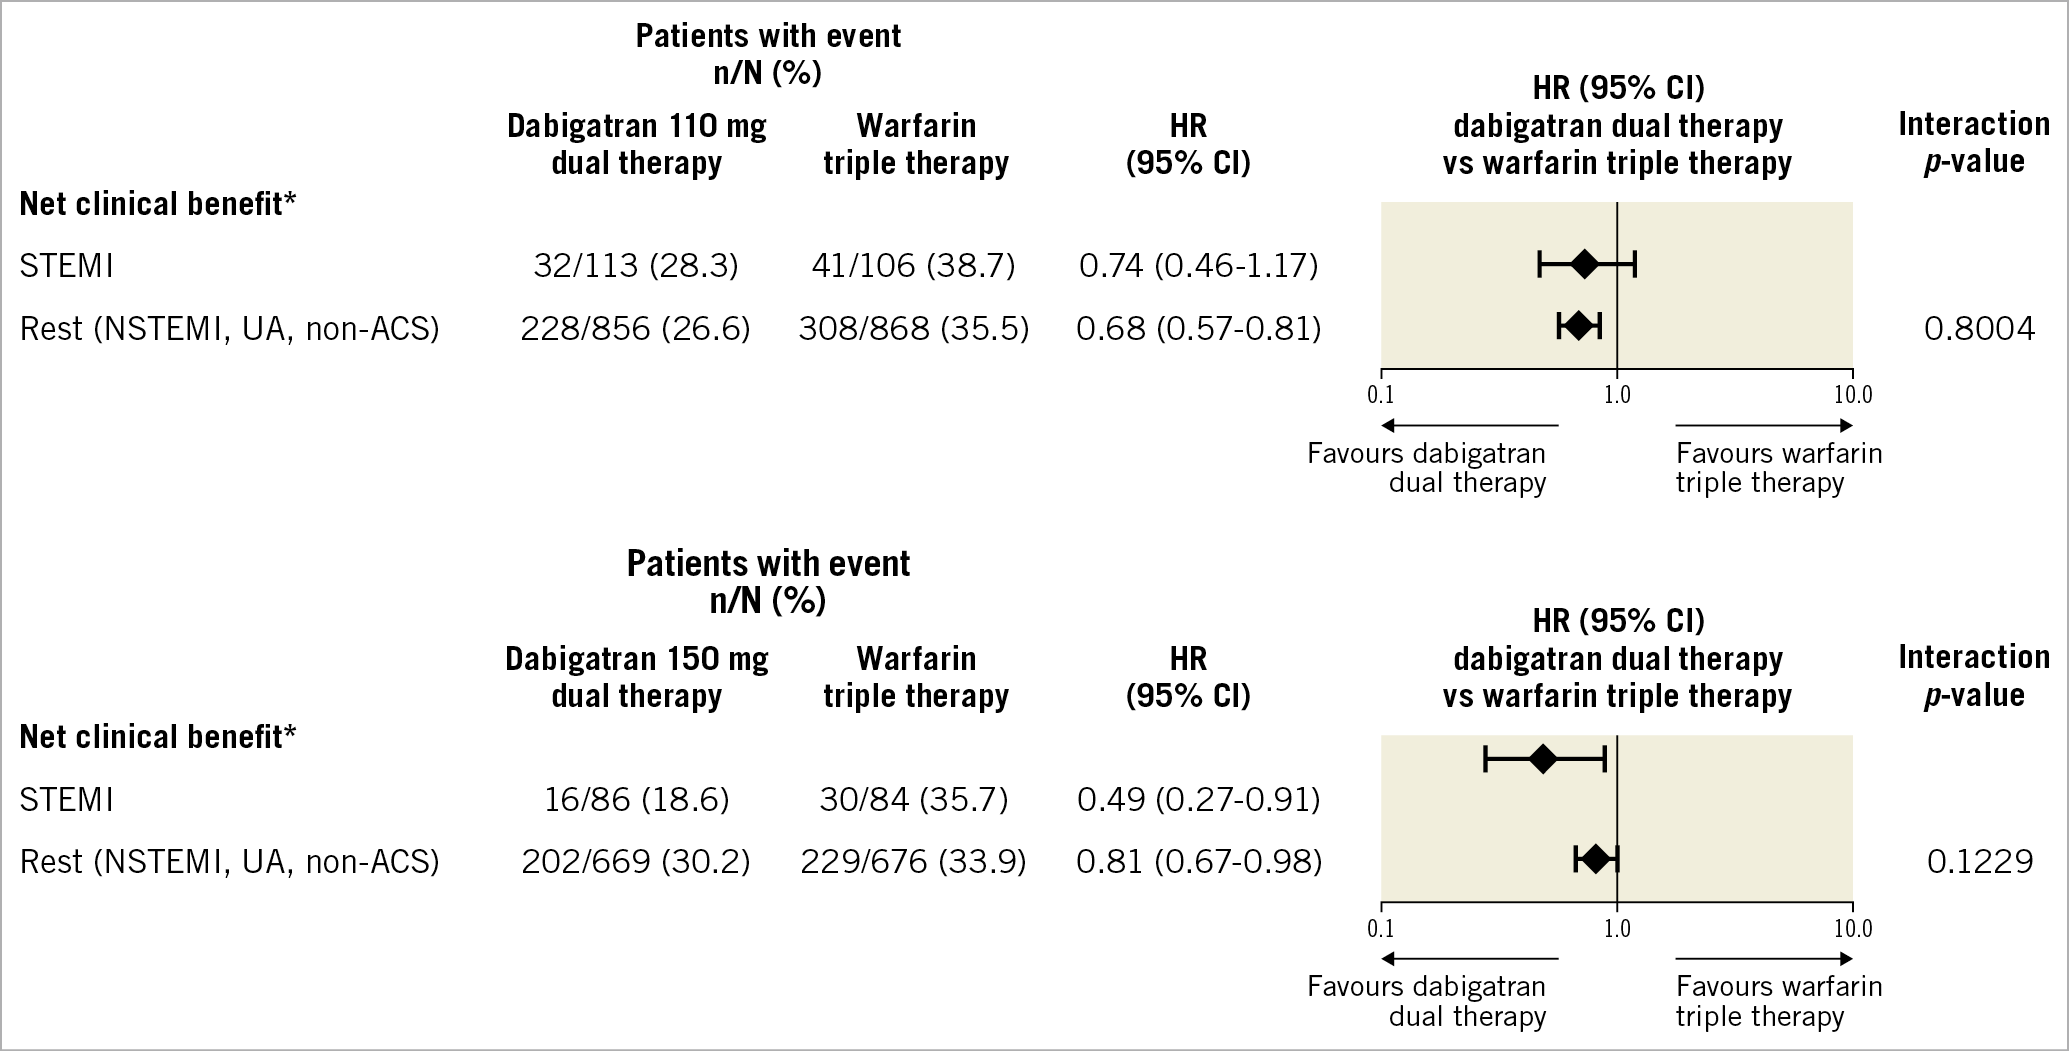 Figure 3. Net clinical benefit in patients with STEMI versus others treated with dabigatran dual therapy versus warfarin triple therapy. * ISTH major bleeding/clinically relevant non-major bleeding/DTE/unplanned revascularisation. HRs and Wald CIs from Cox proportional hazards model. For the comparison dabigatran 110 mg dual therapy versus warfarin triple therapy, the model is stratified by age, non-elderly versus elderly (<70 or ≥70 years in Japan and <80 or ≥80 years elsewhere). For the comparison dabigatran 150 mg dual therapy versus warfarin triple therapy, an unstratified model is applied and elderly patients outside the USA were excluded. Exploratory interaction p-values for the interaction between treatment and subgroup. ACS: acute coronary syndrome; CI: confidence interval; DTE: death, thromboembolic events; HR: hazard ratio; ISTH: International Society on Thrombosis and Haemostasis; NSTEMI: non-ST-segment elevation myocardial infarction; STEMI: ST-elevation myocardial infarction; UA: unstable angina